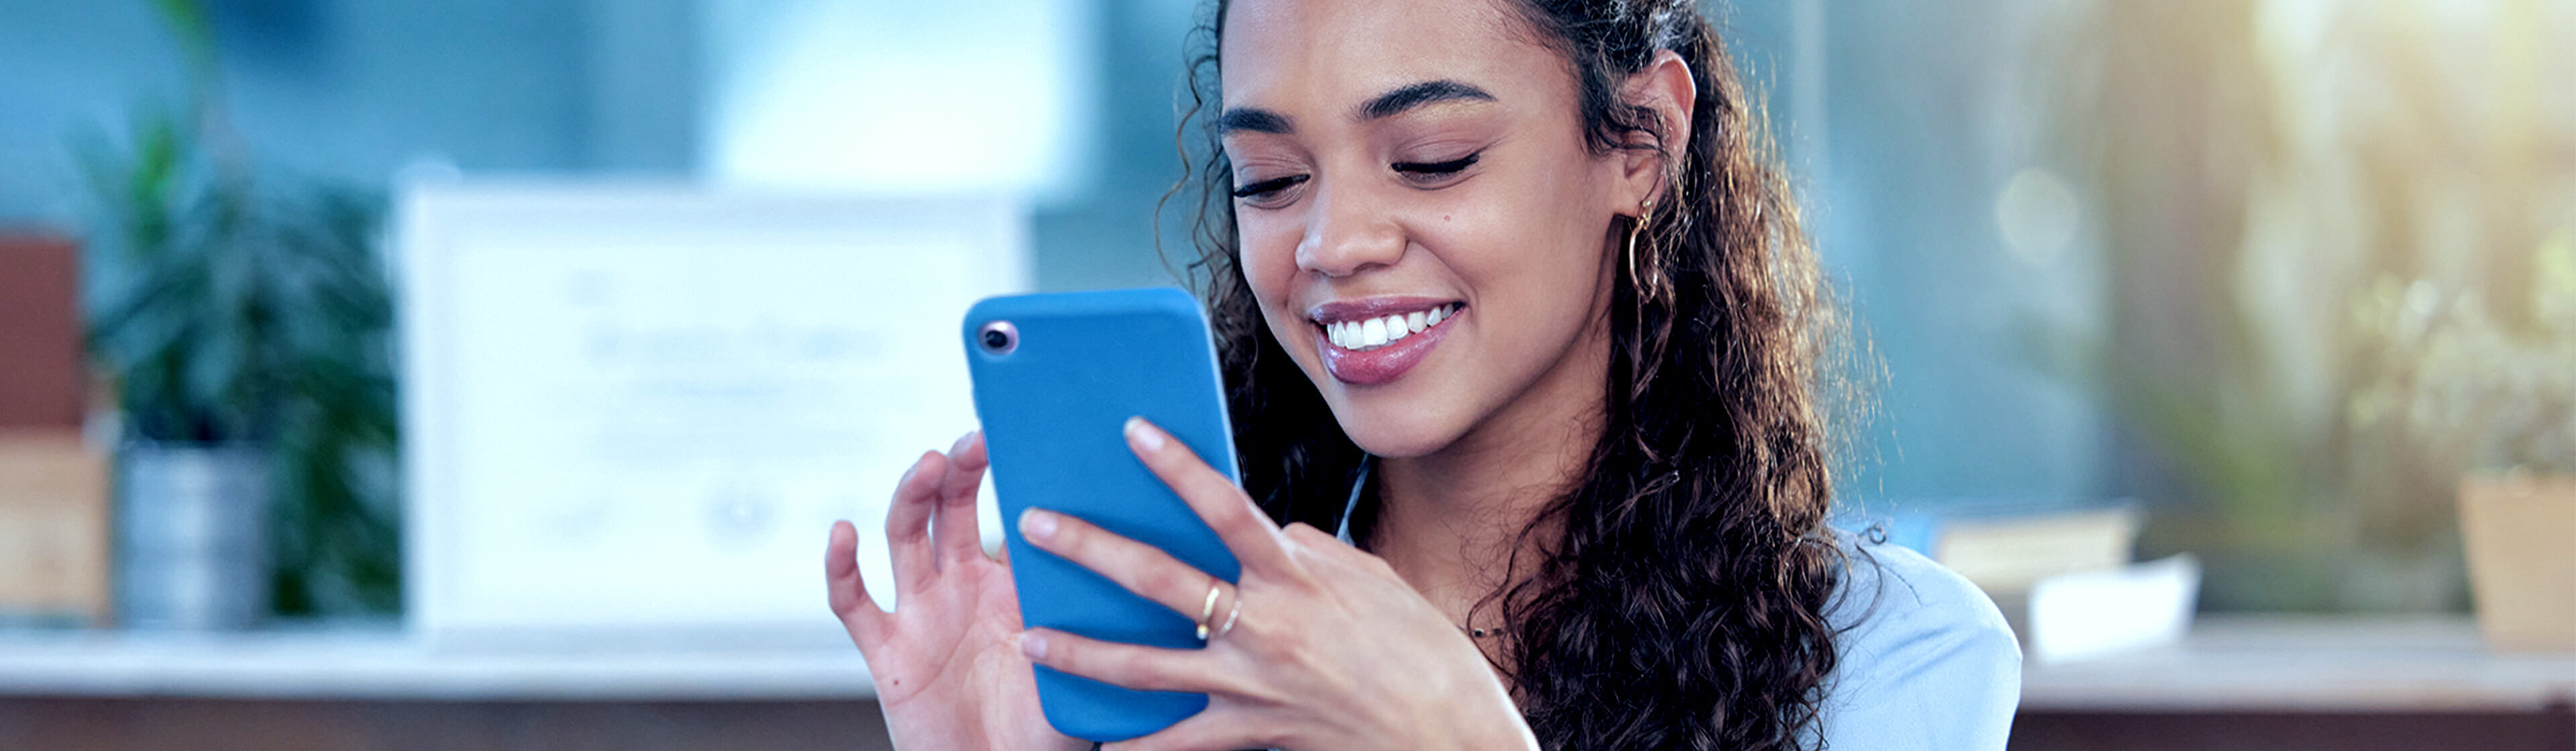 A woman wearing a sky blue coloured shirt smiling while looking at a mobile phone